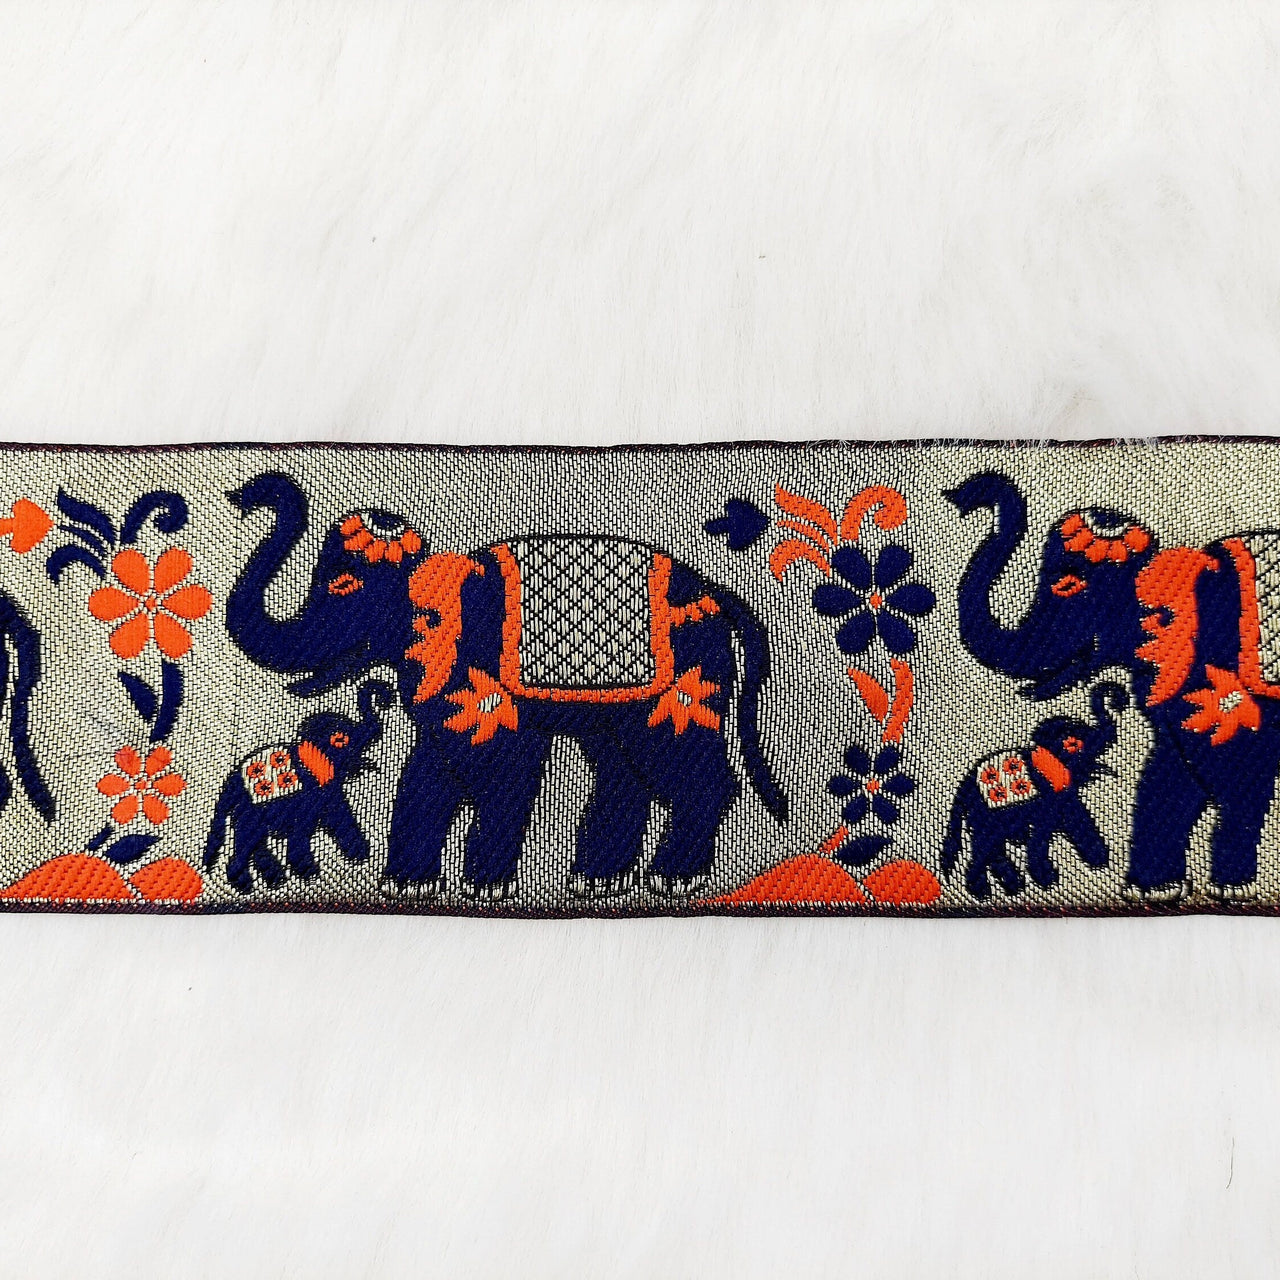 9 Yards Antique Silver Jacquard Brocade Saree Border Trim with Elephant Woven in Navy Blue and Orange, Decorative Trim